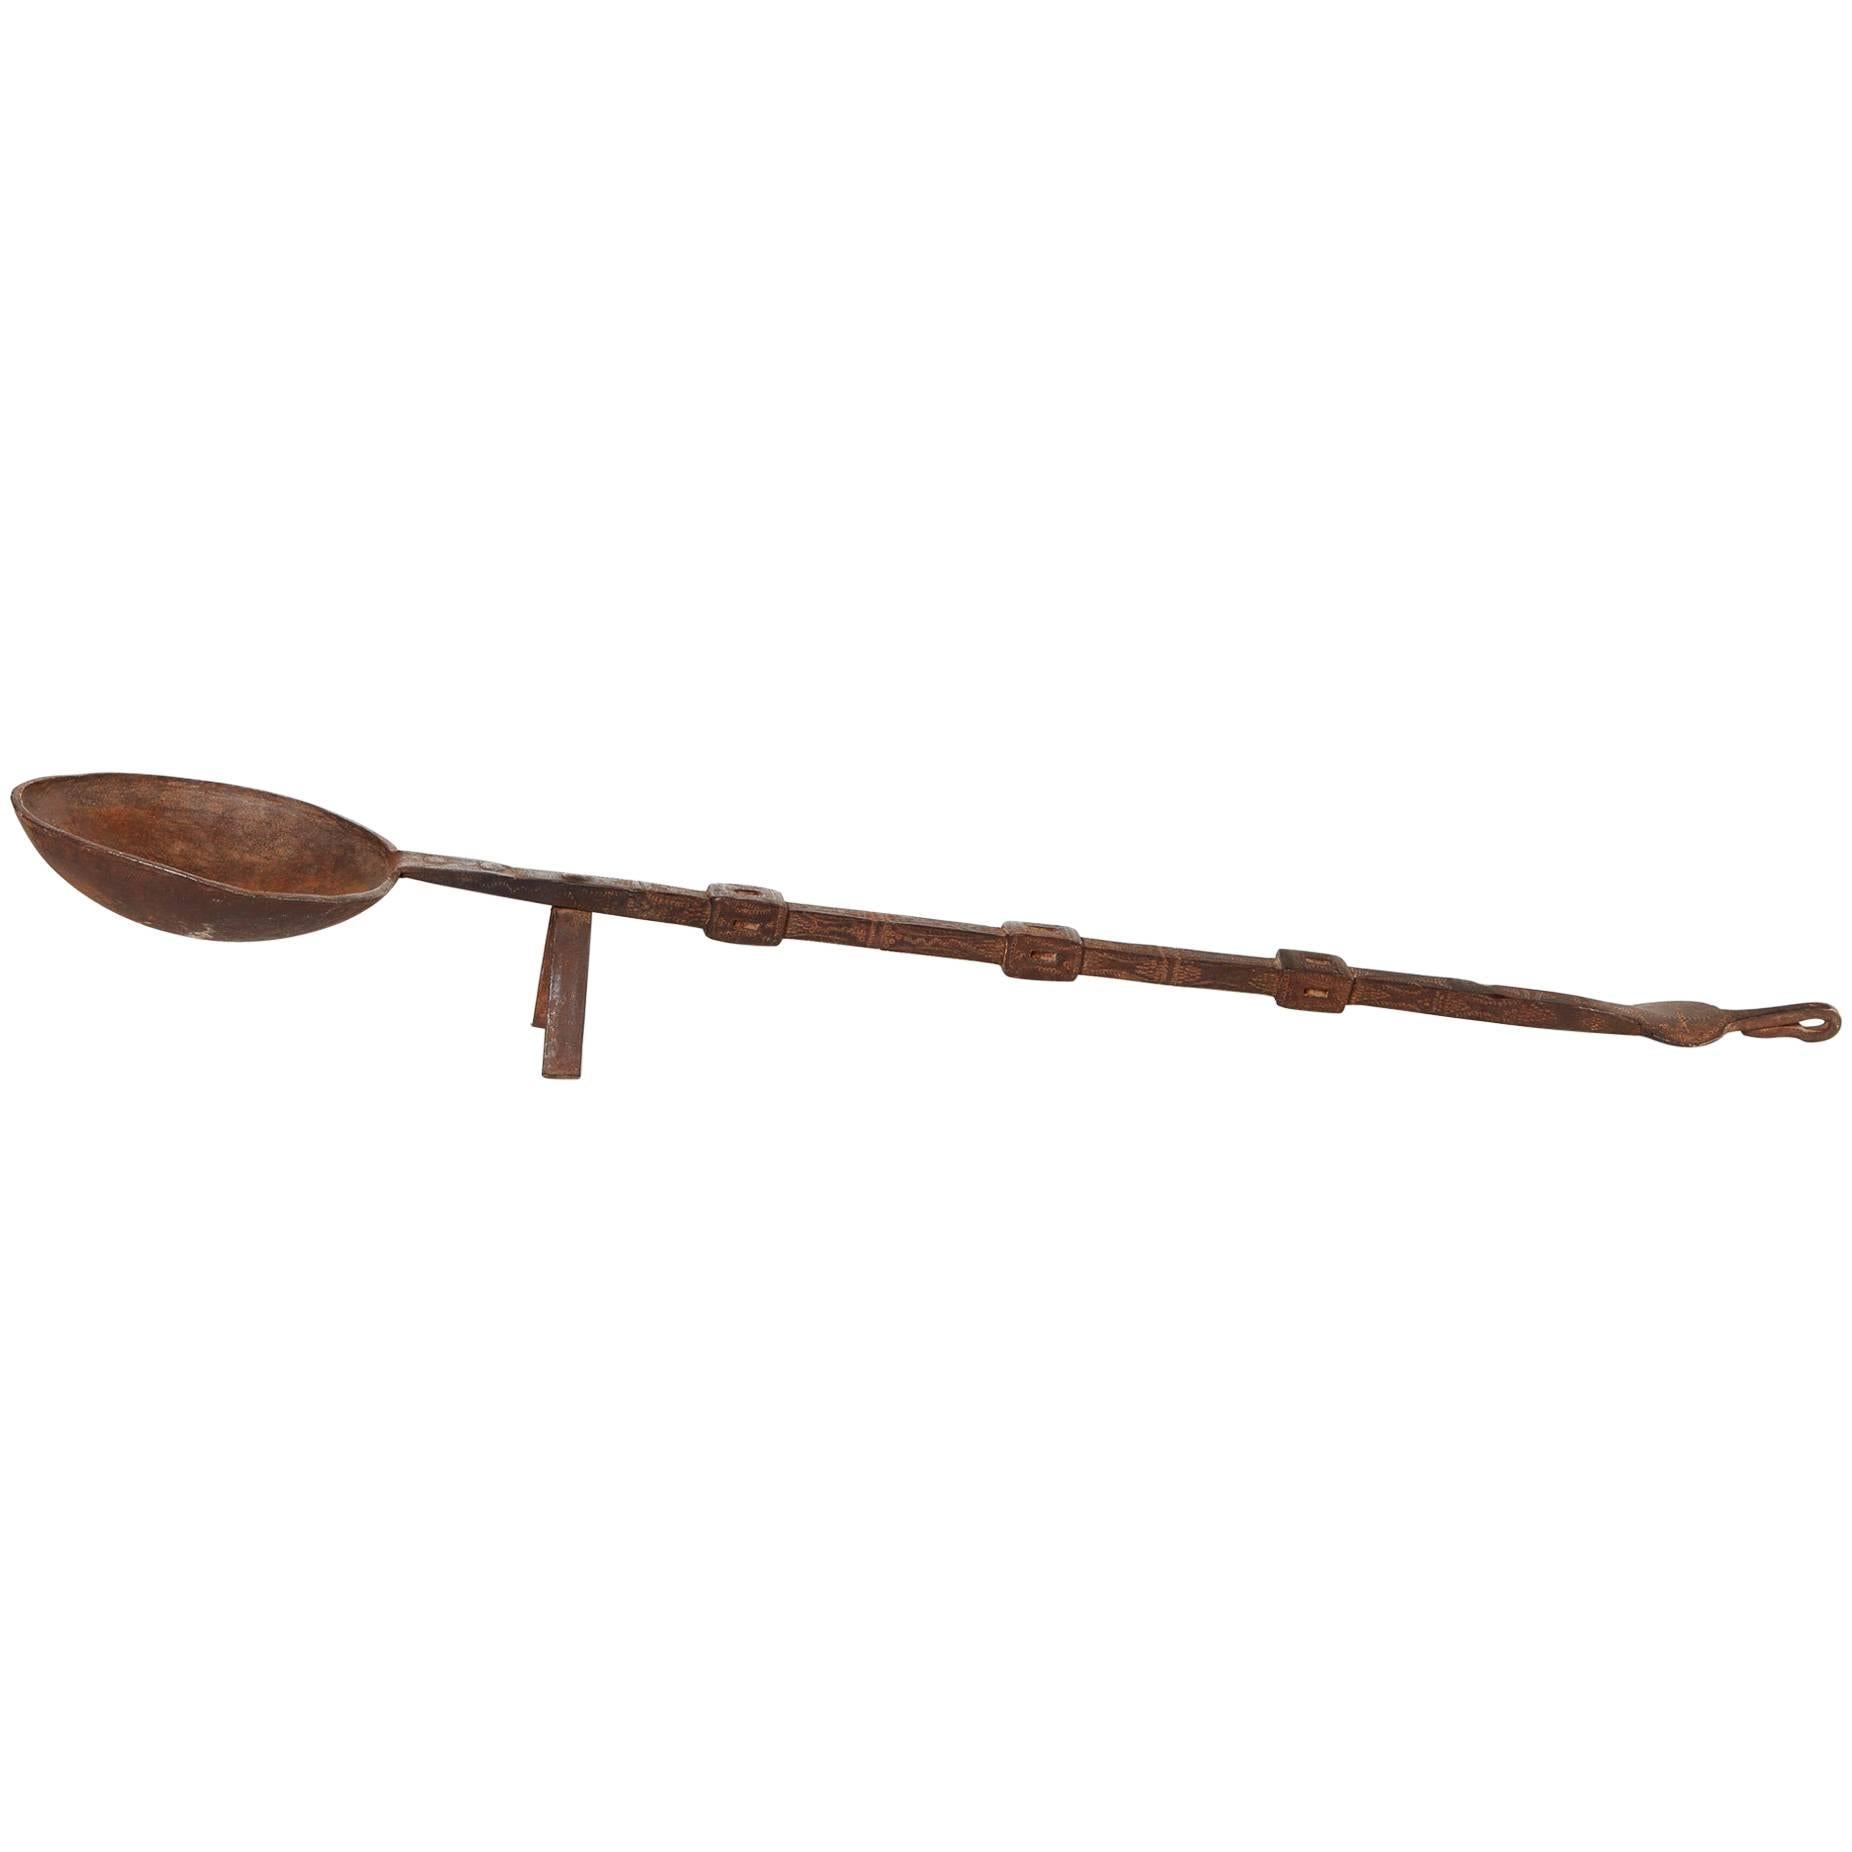 Early 20th Century Iron Cooking Utencil from India